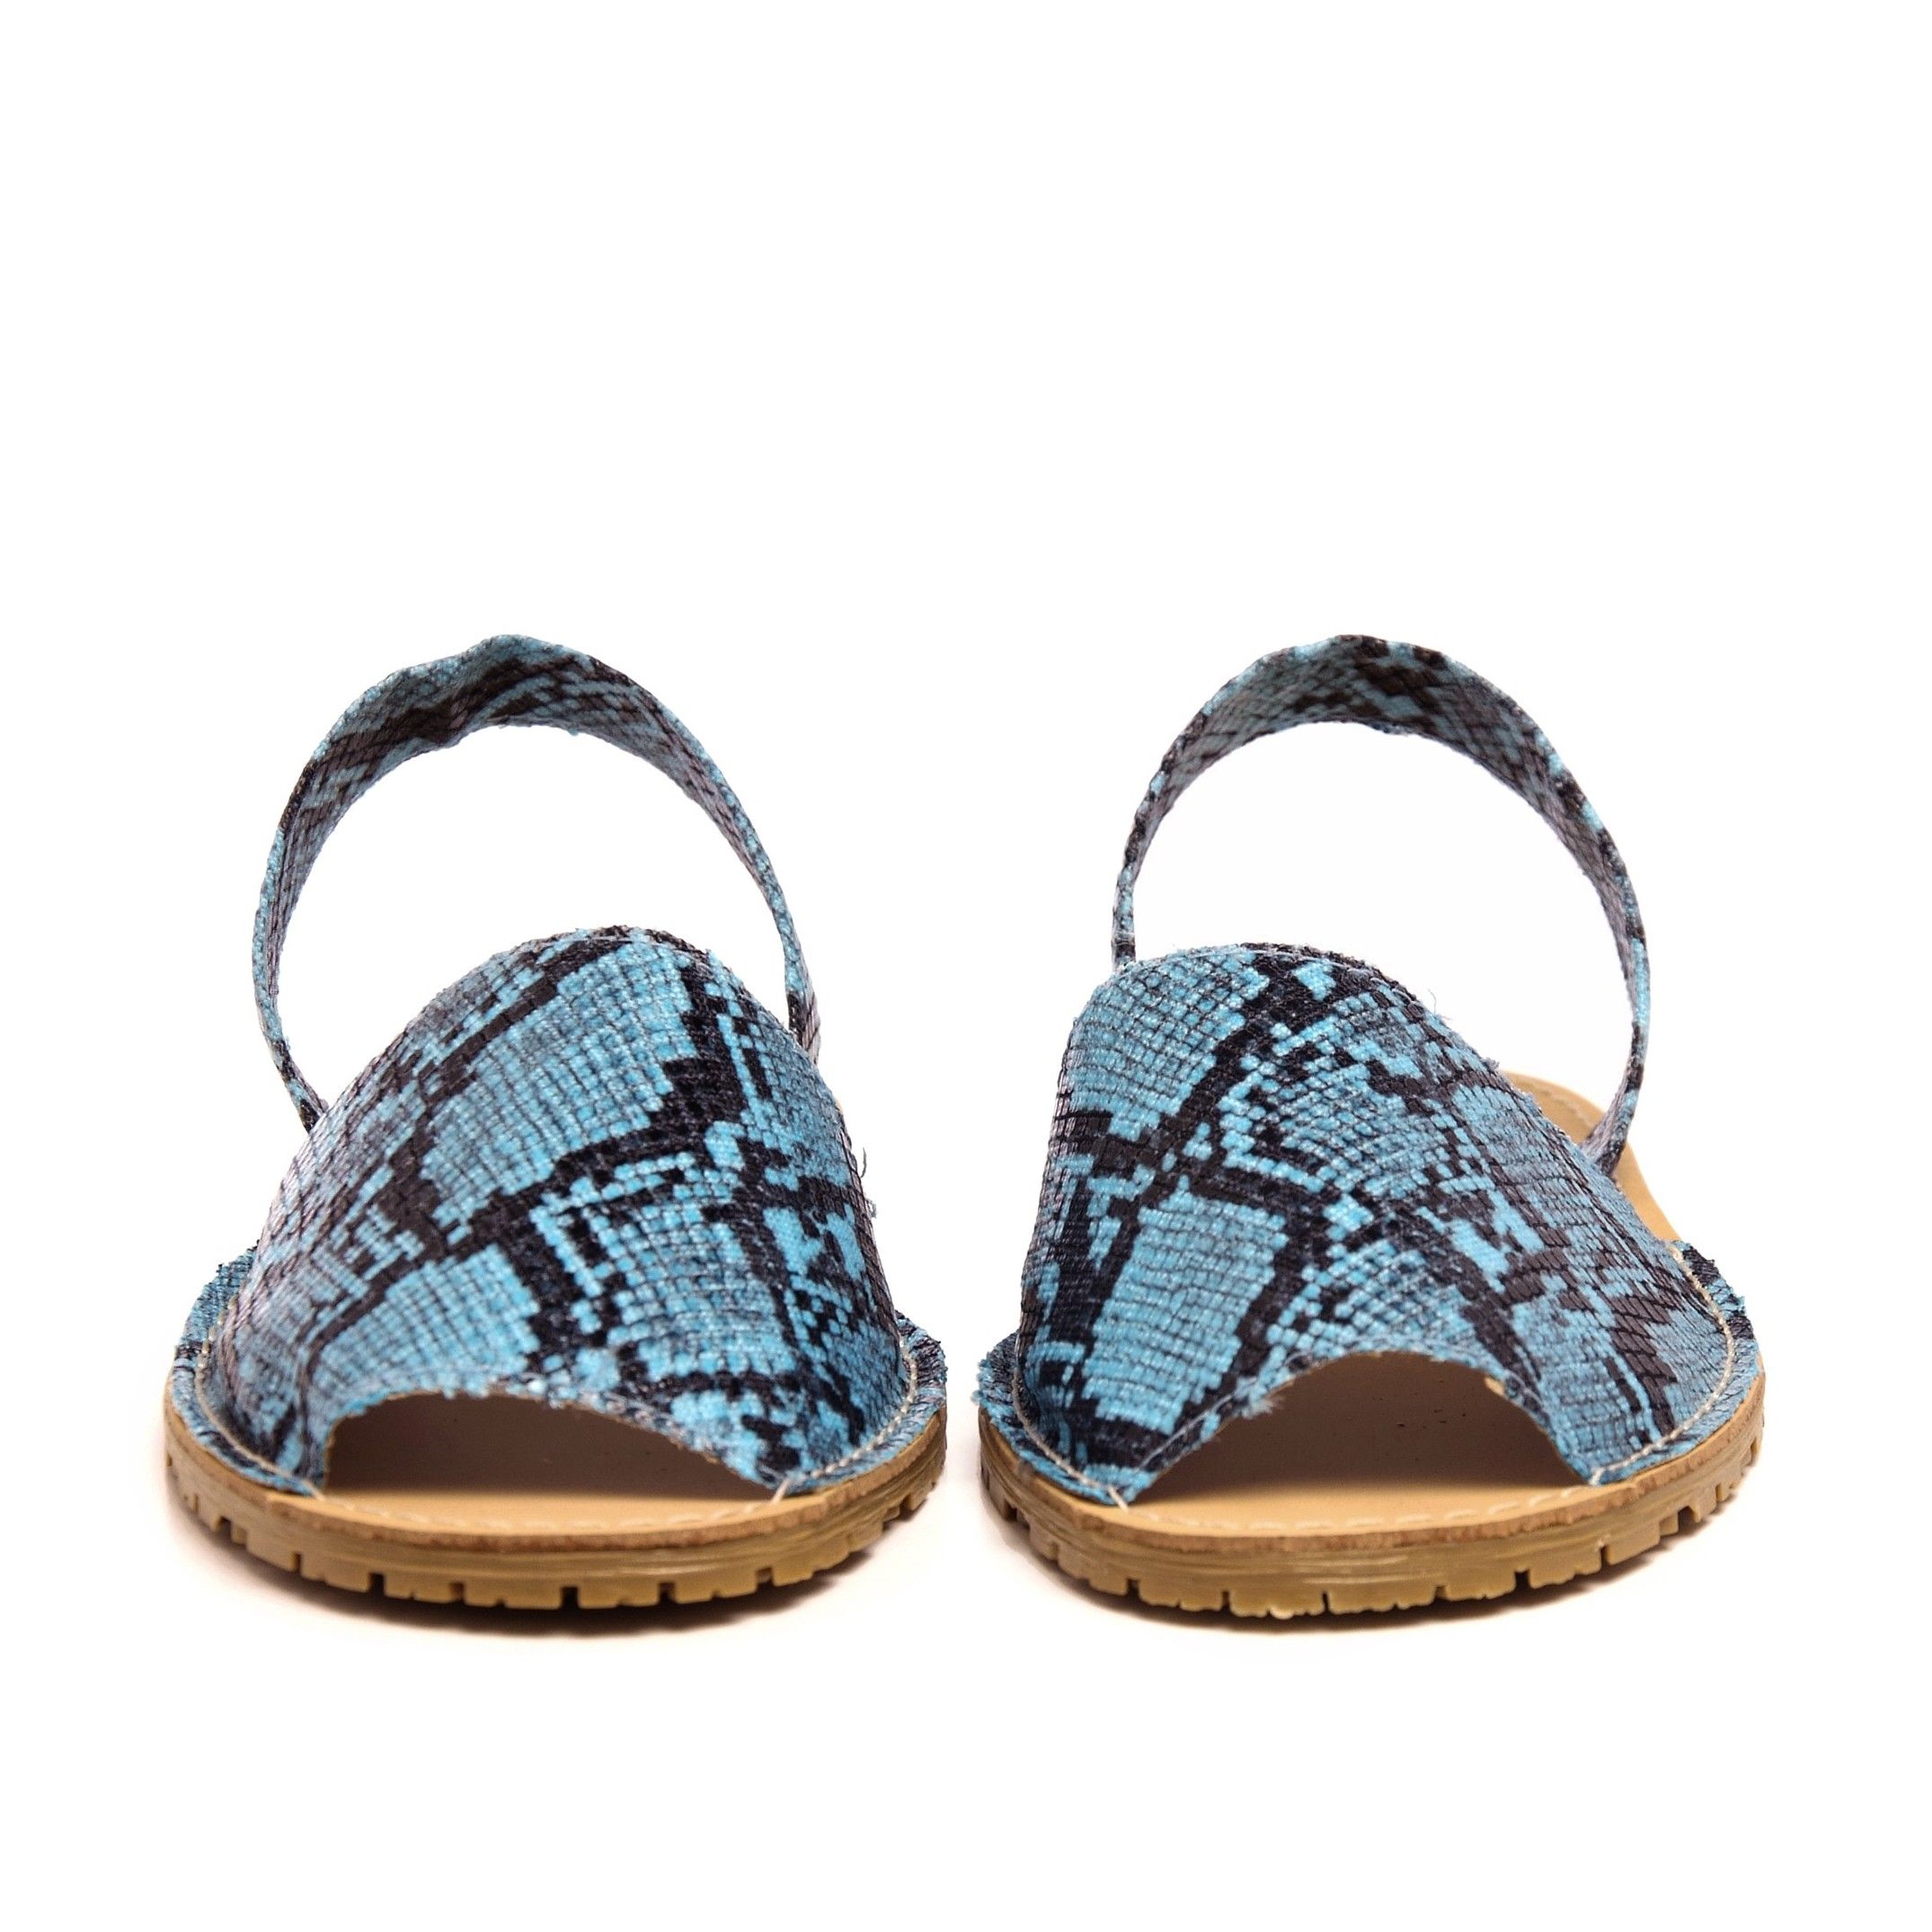 Classic leather sandal Menorquina in fluor snake. Upper and inner: leather. Sole: anti-slip rubber. MADE IN SPAIN